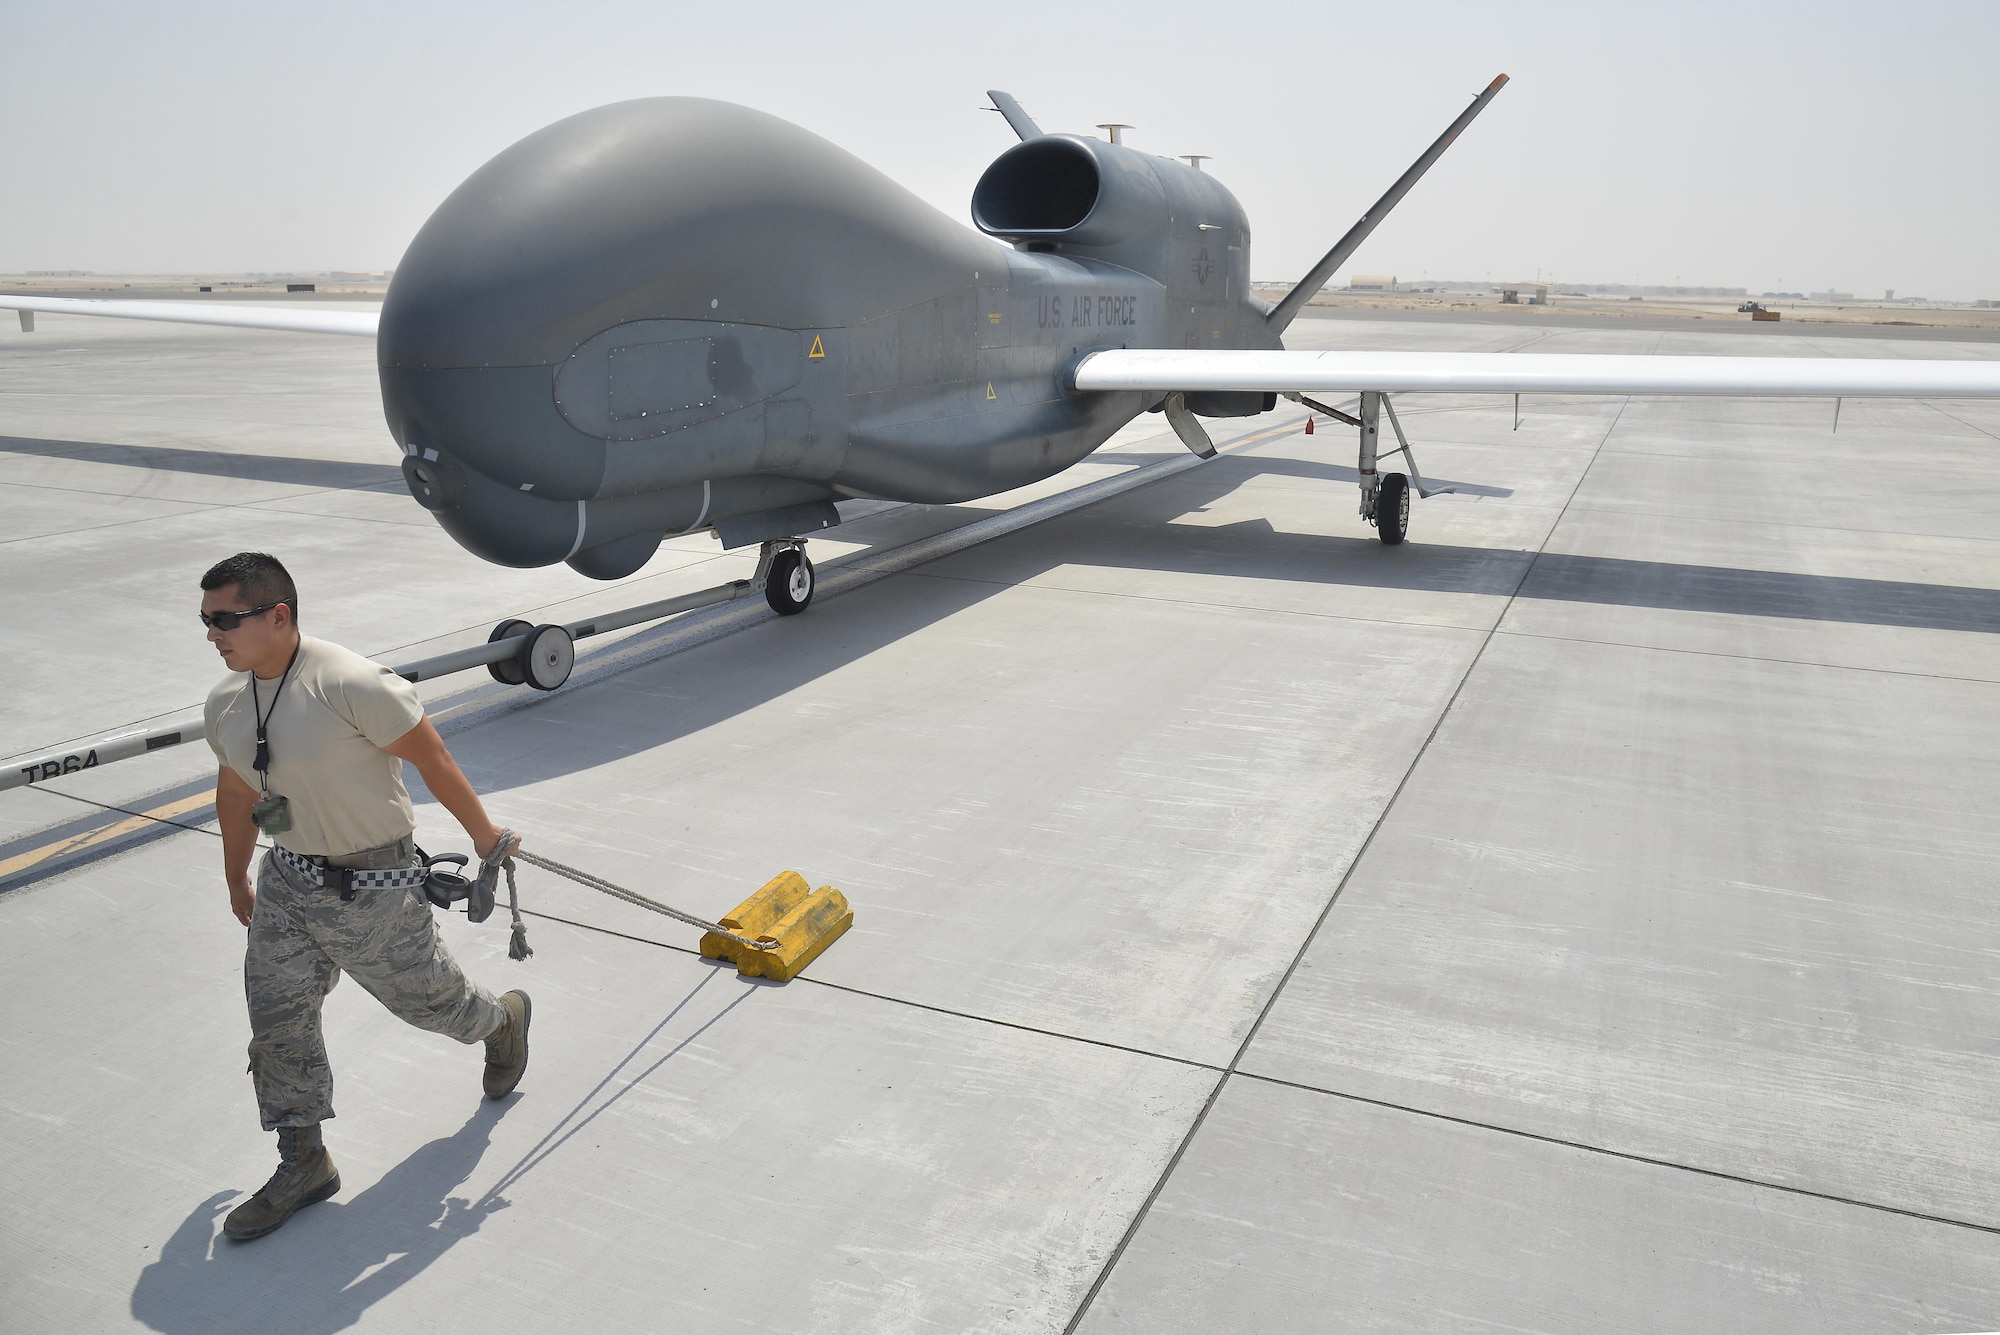 Senior Airman Jose pulls a set of chalks while escorting an RQ-4 Global Hawk back to a hangar during ground operations at an undisclosed location in Southwest Asia September 18, 2015. Jose is an assistant dedicated crew chief assigned to the 380th Expeditionary Aircraft Maintenance Squadron. (U.S. Air Force photo/Tech. Sgt. Christopher Boitz)